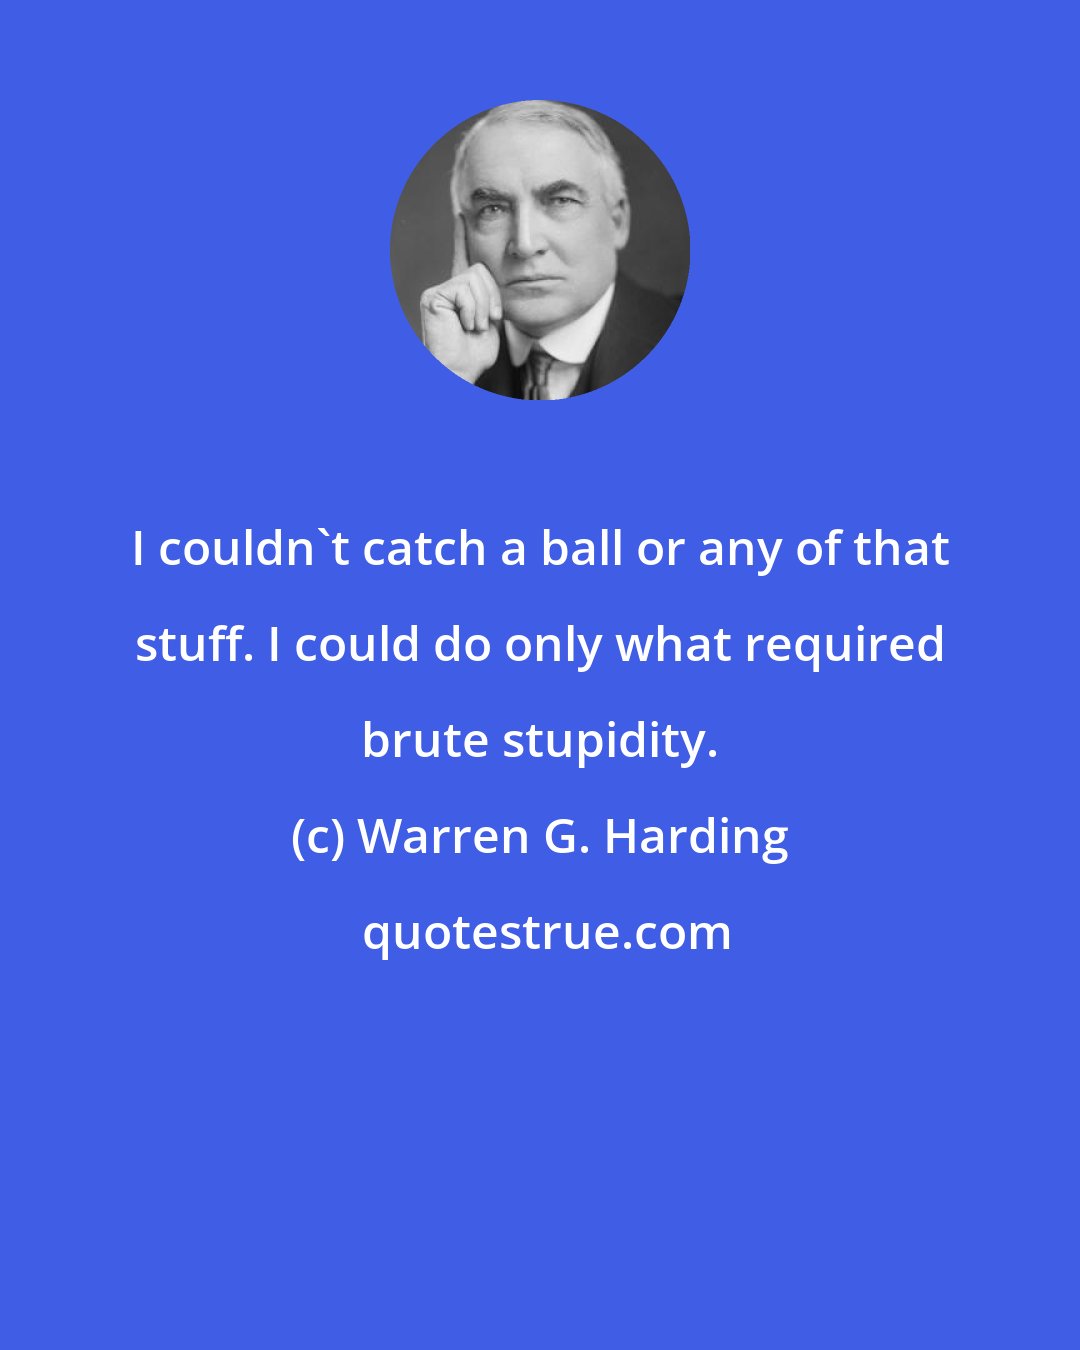 Warren G. Harding: I couldn't catch a ball or any of that stuff. I could do only what required brute stupidity.